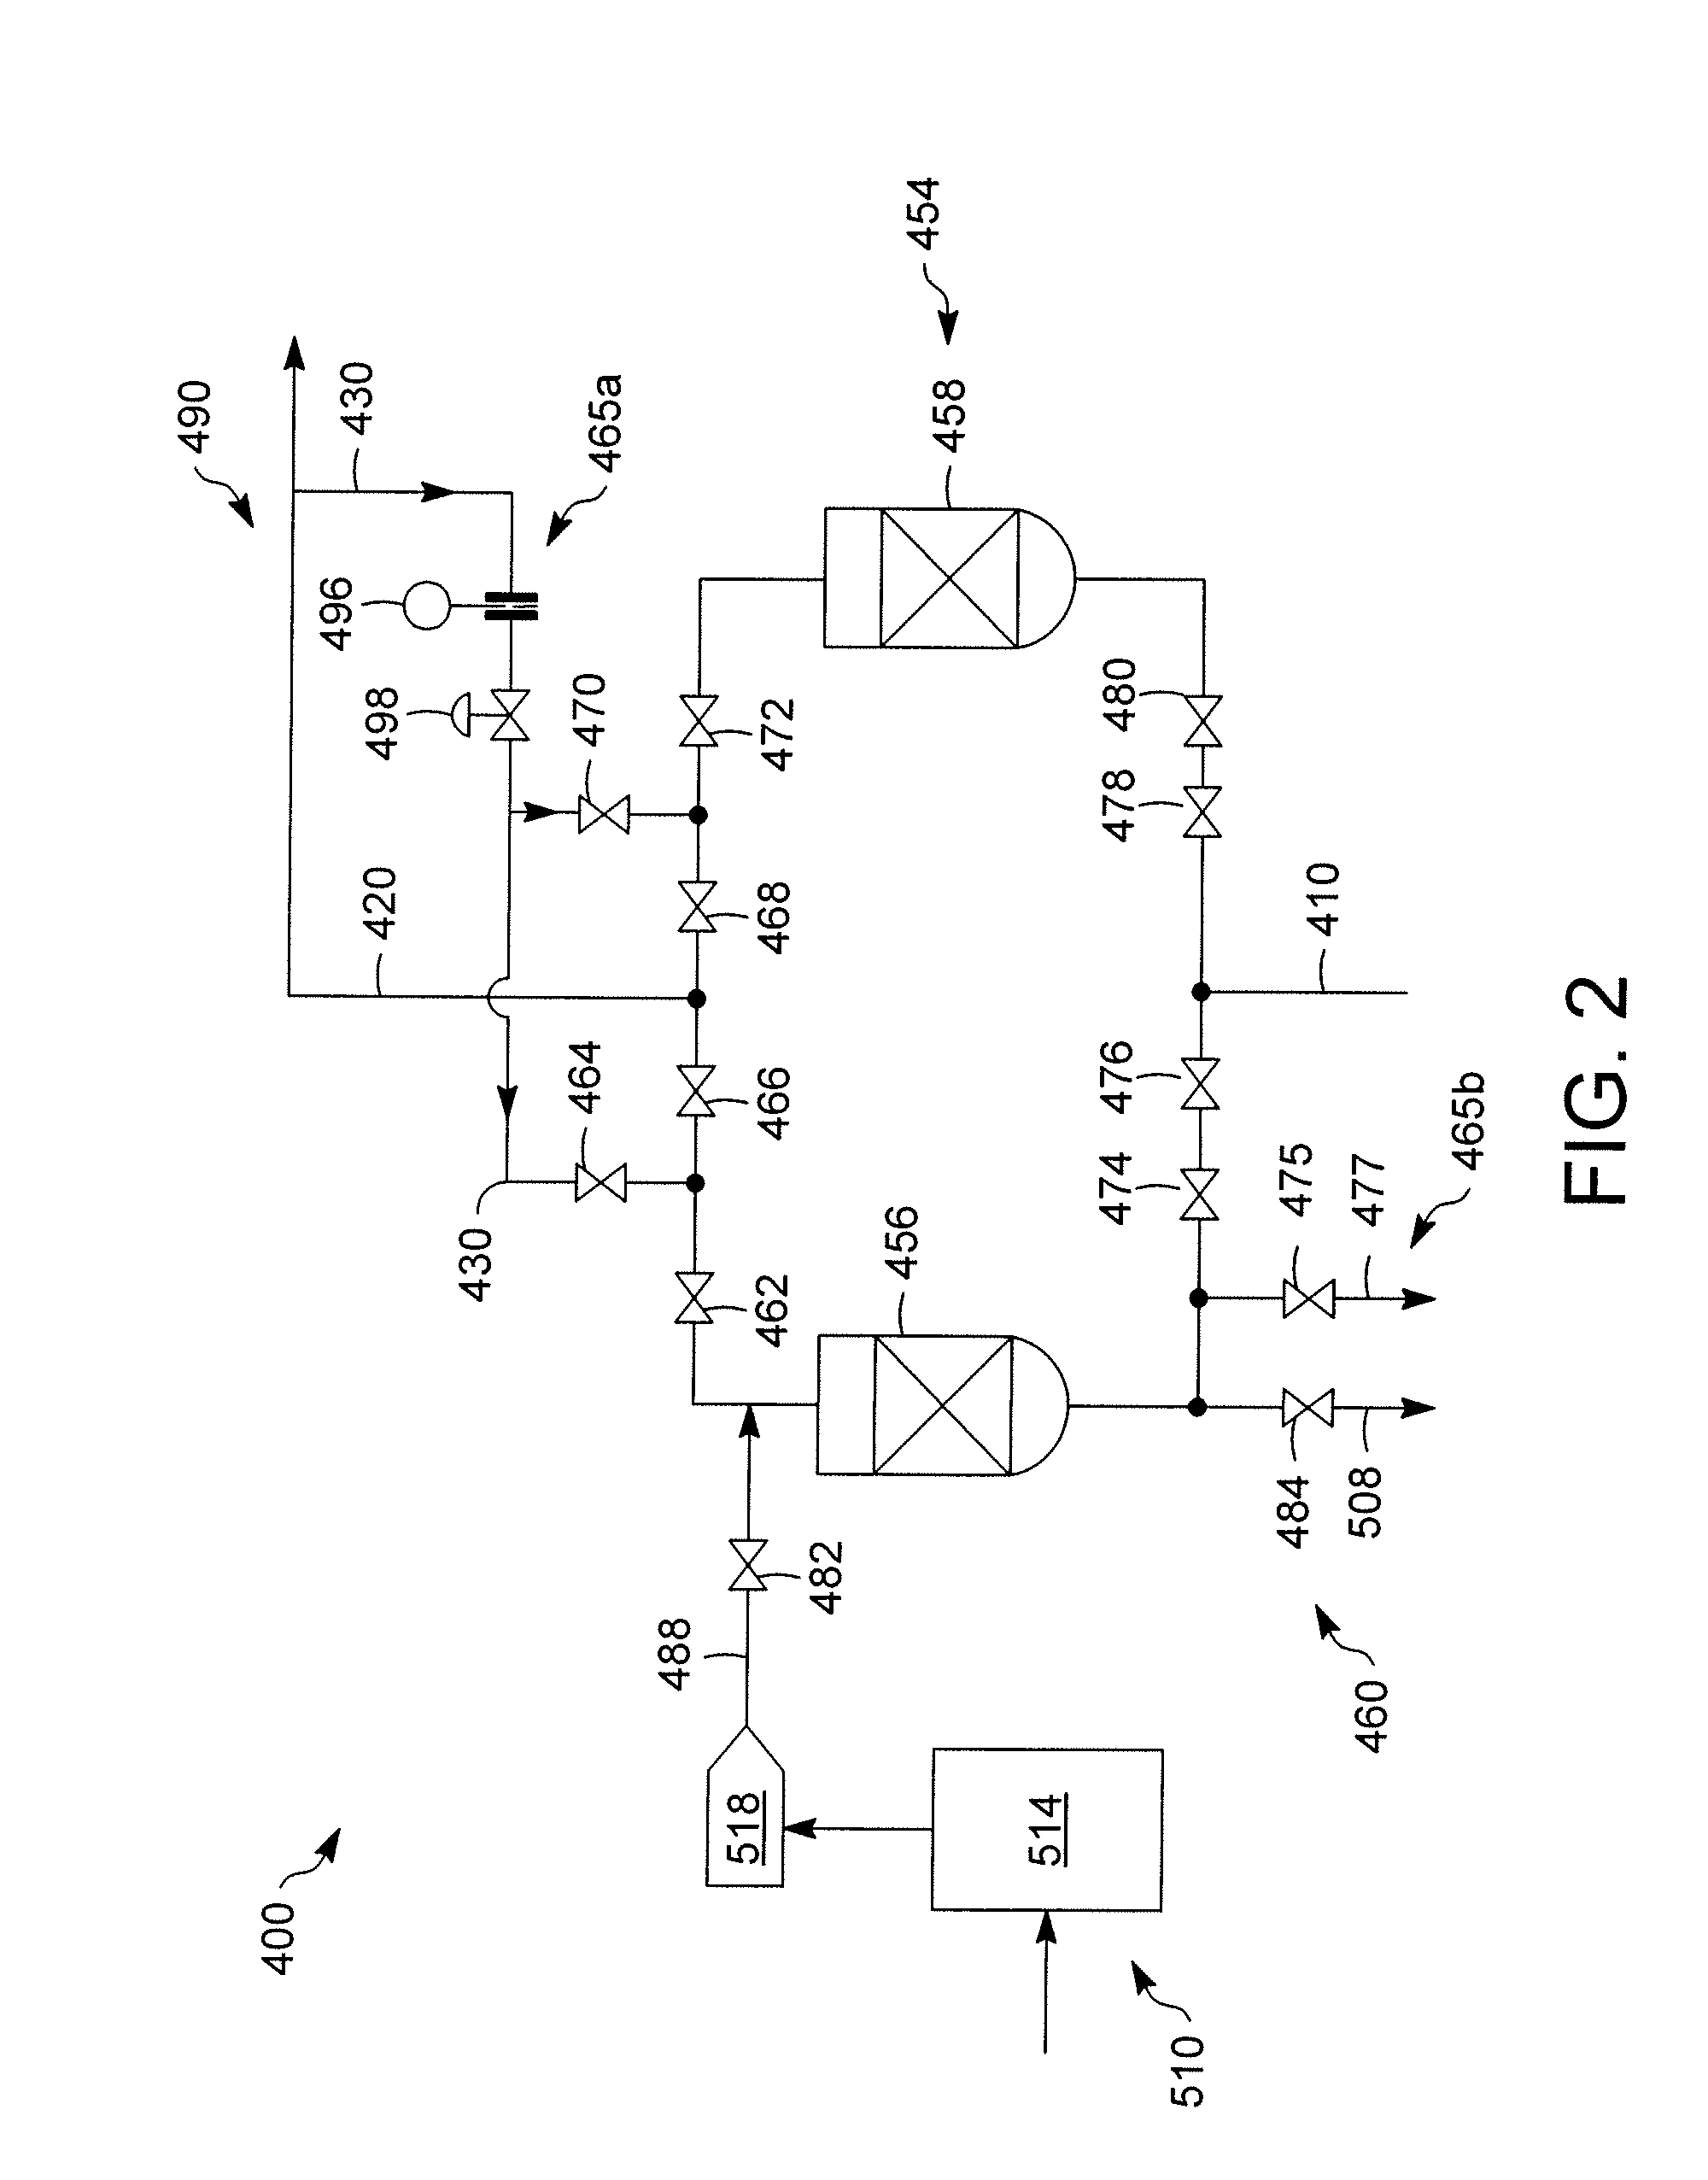 Apparatus and Process for Isomerizing a Hydrogen Stream